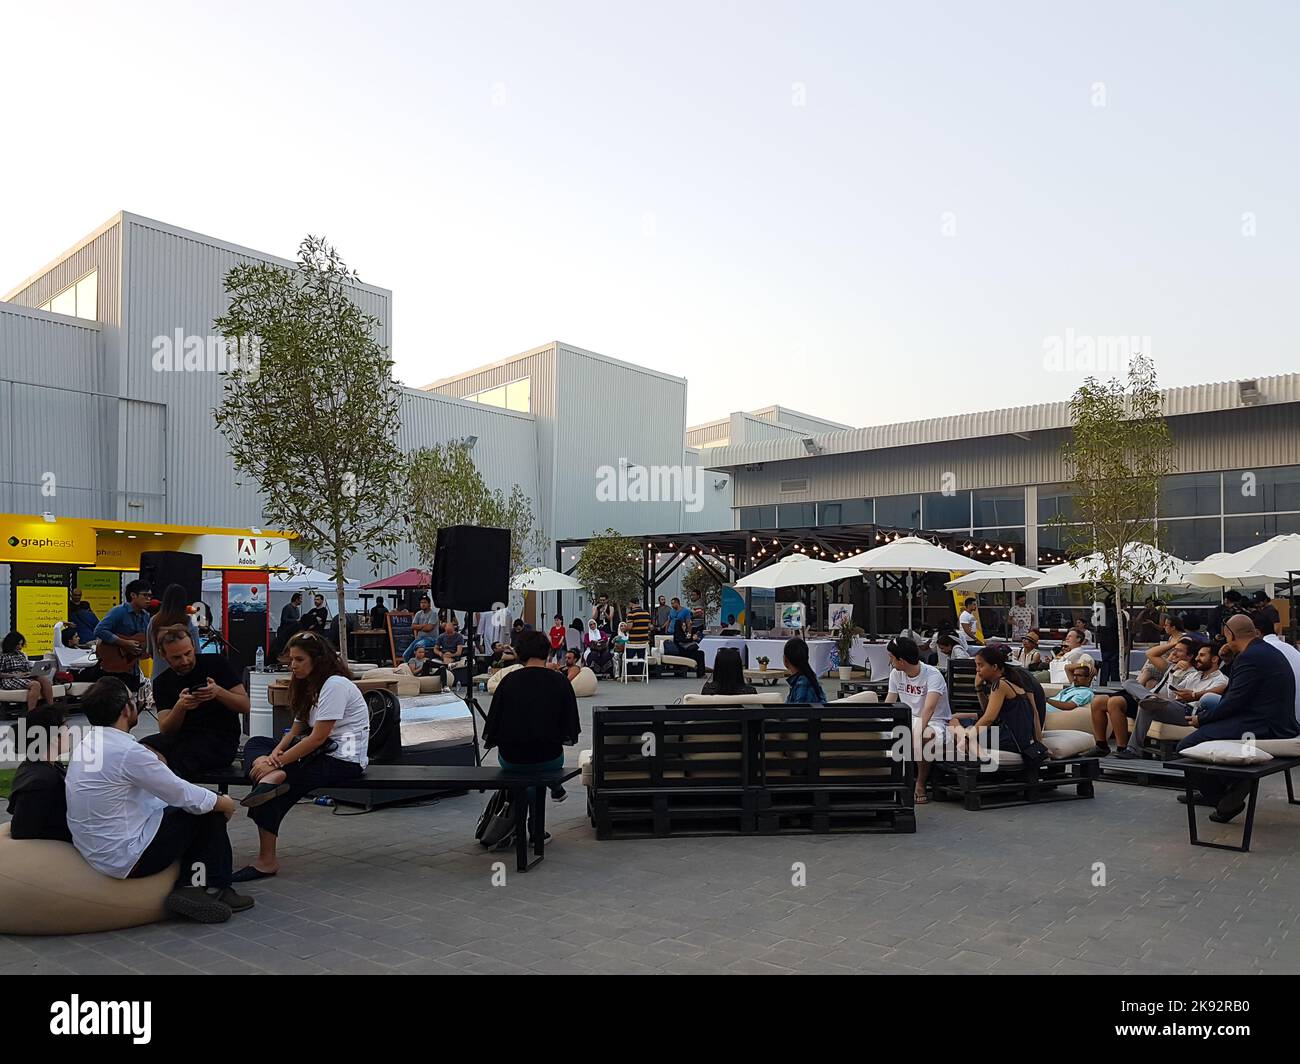 Art Fair in Alserkal Avenue during Art Week. People gathered in outdoor seating with benches, pop-up stalls, and big umbrellas. Urban city day scene. Stock Photo